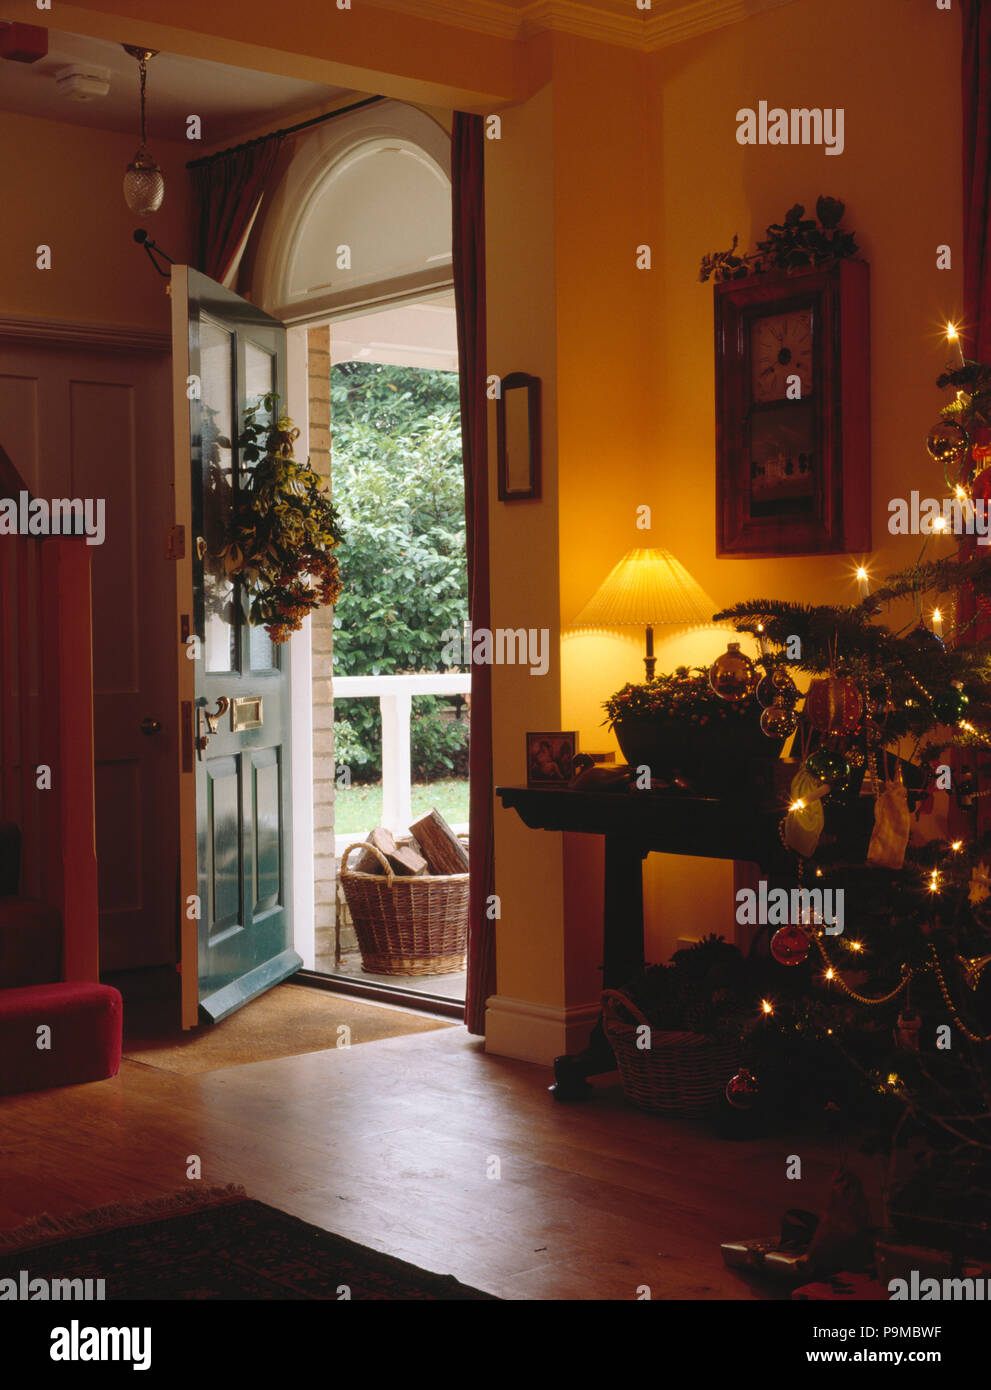 Lighted lamp on table in country hall with Christmas tree and wreath on open front door Stock Photo